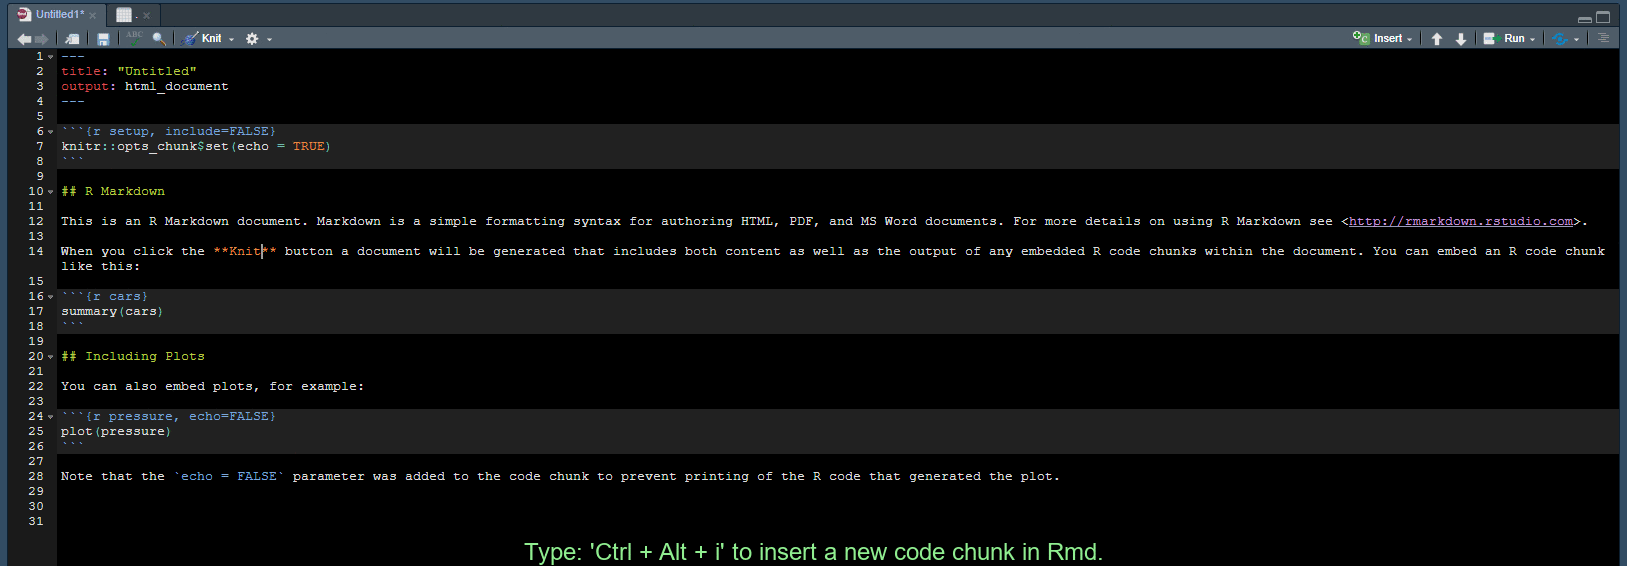 shorcut for inserting a code chunk